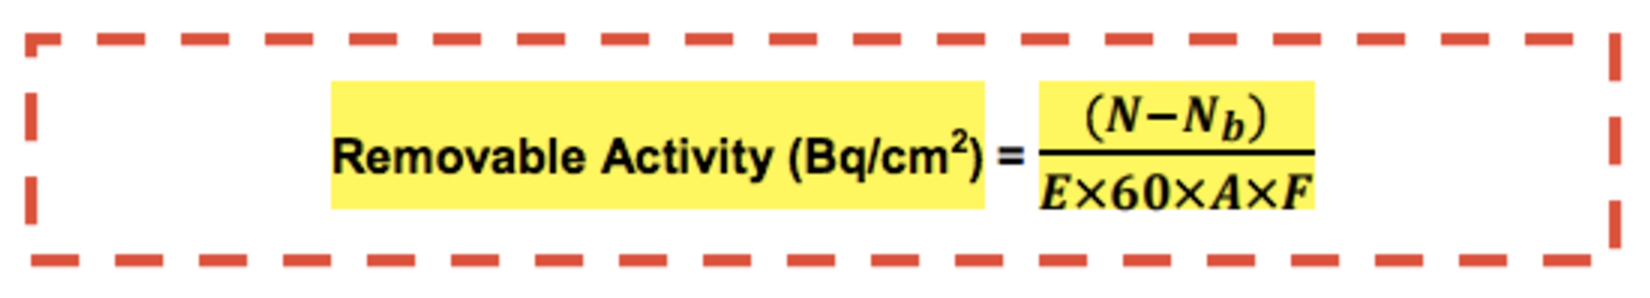 Removeable activity equation